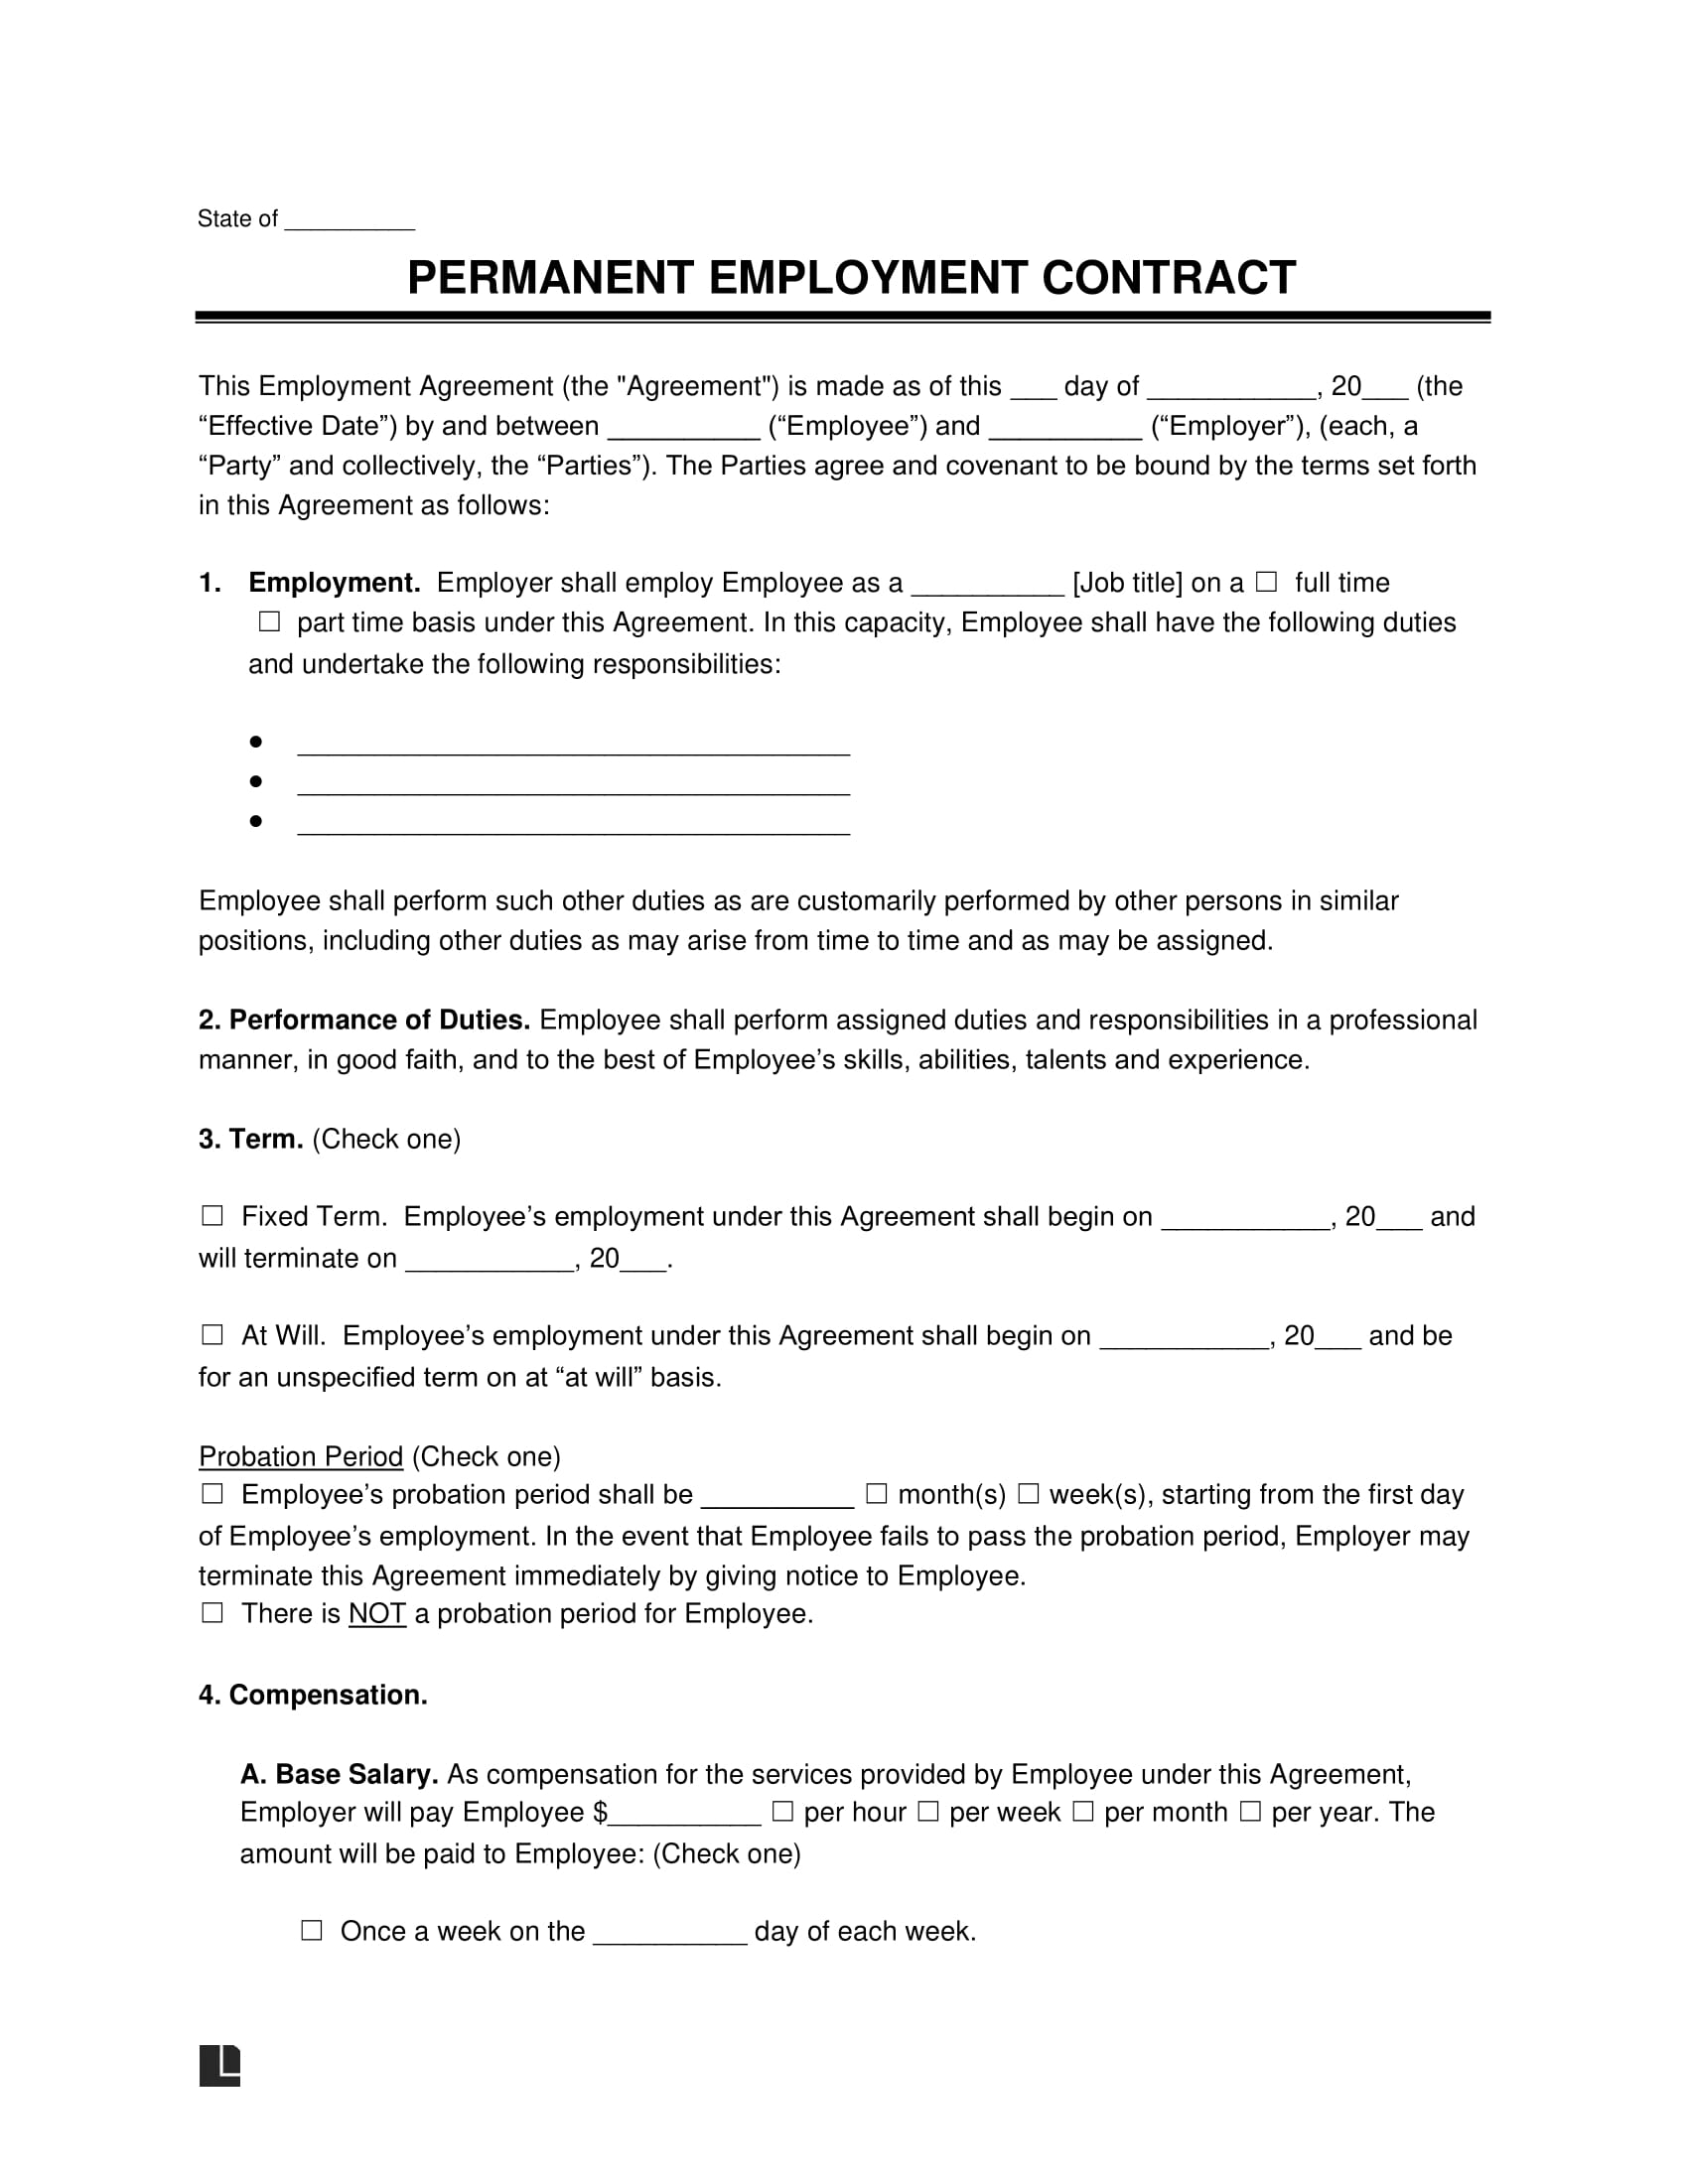 Free Permanent Employment Contract Template PDF & Word